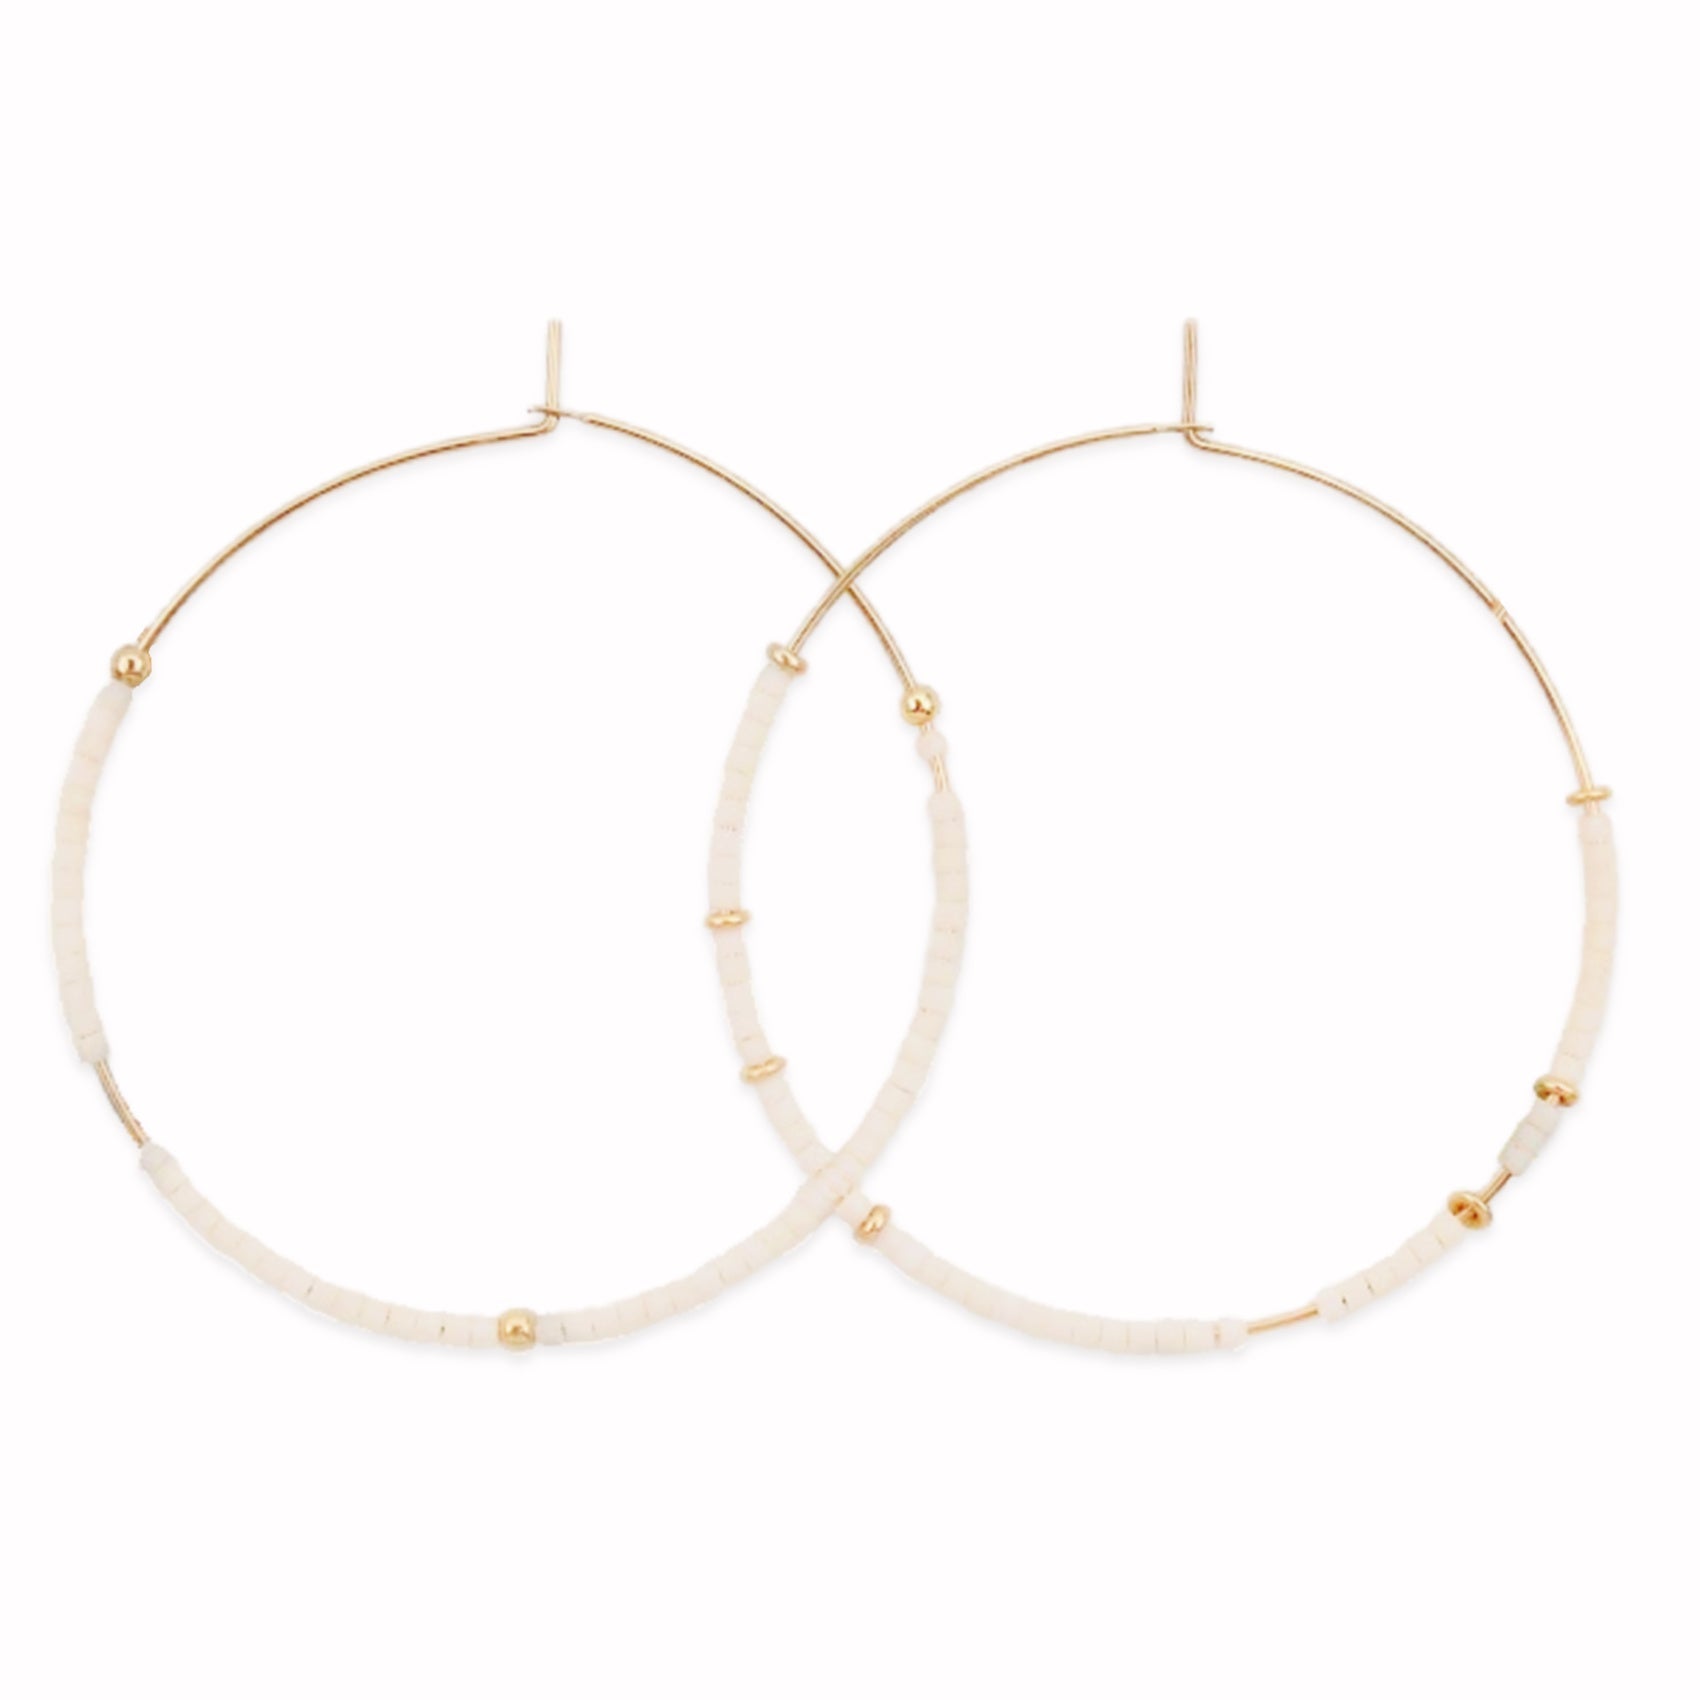 Eggshell and Gold Filled Hoops